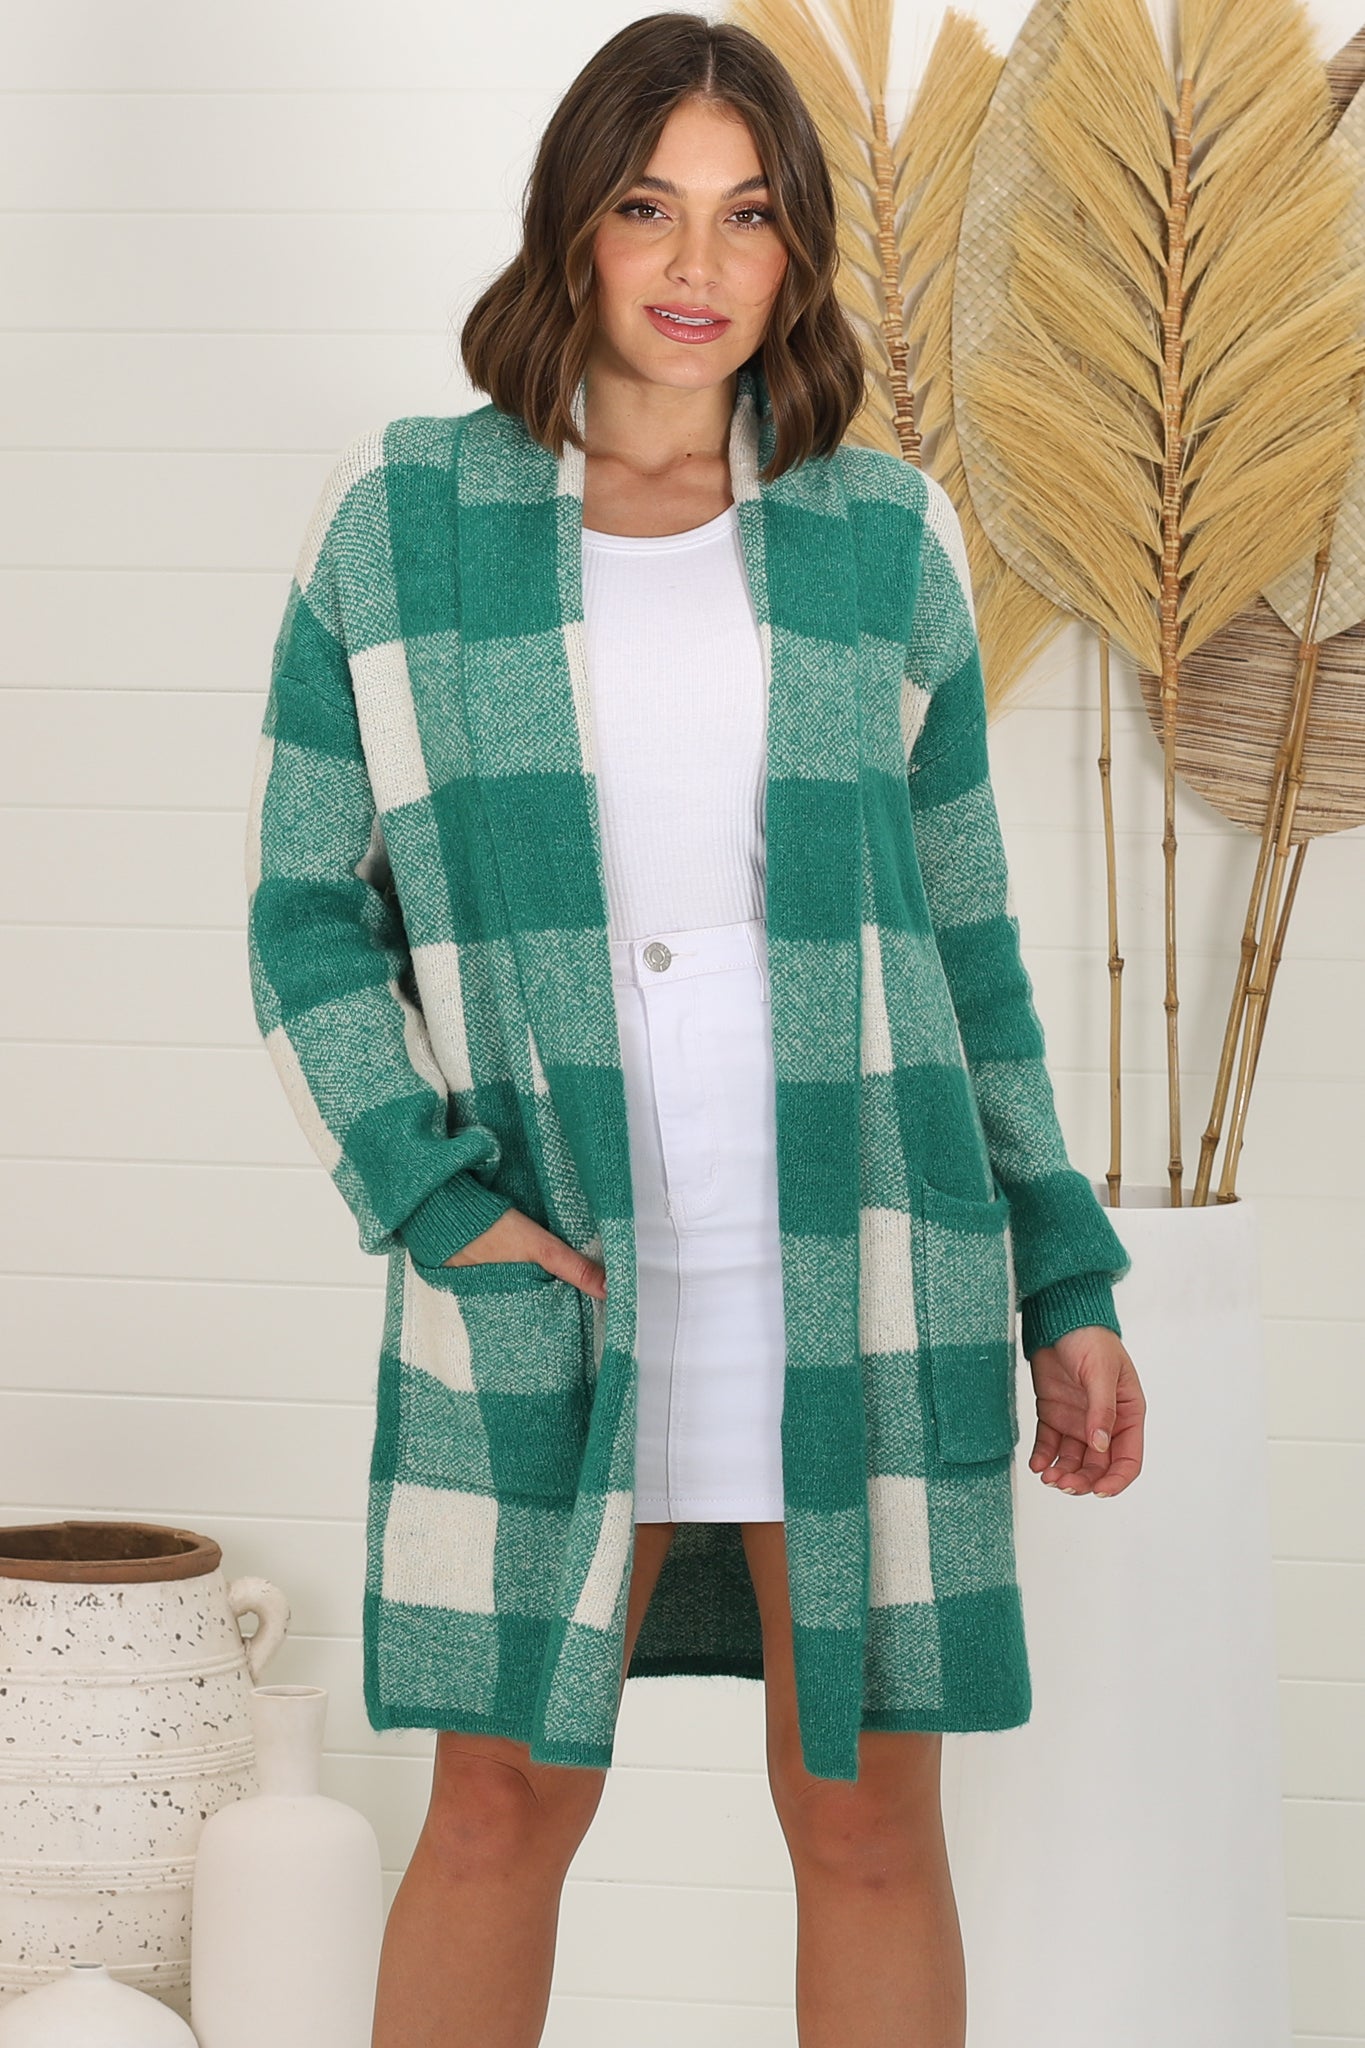 Adelen Cardigan - Folded Center Front Checkered Cardigan in Green